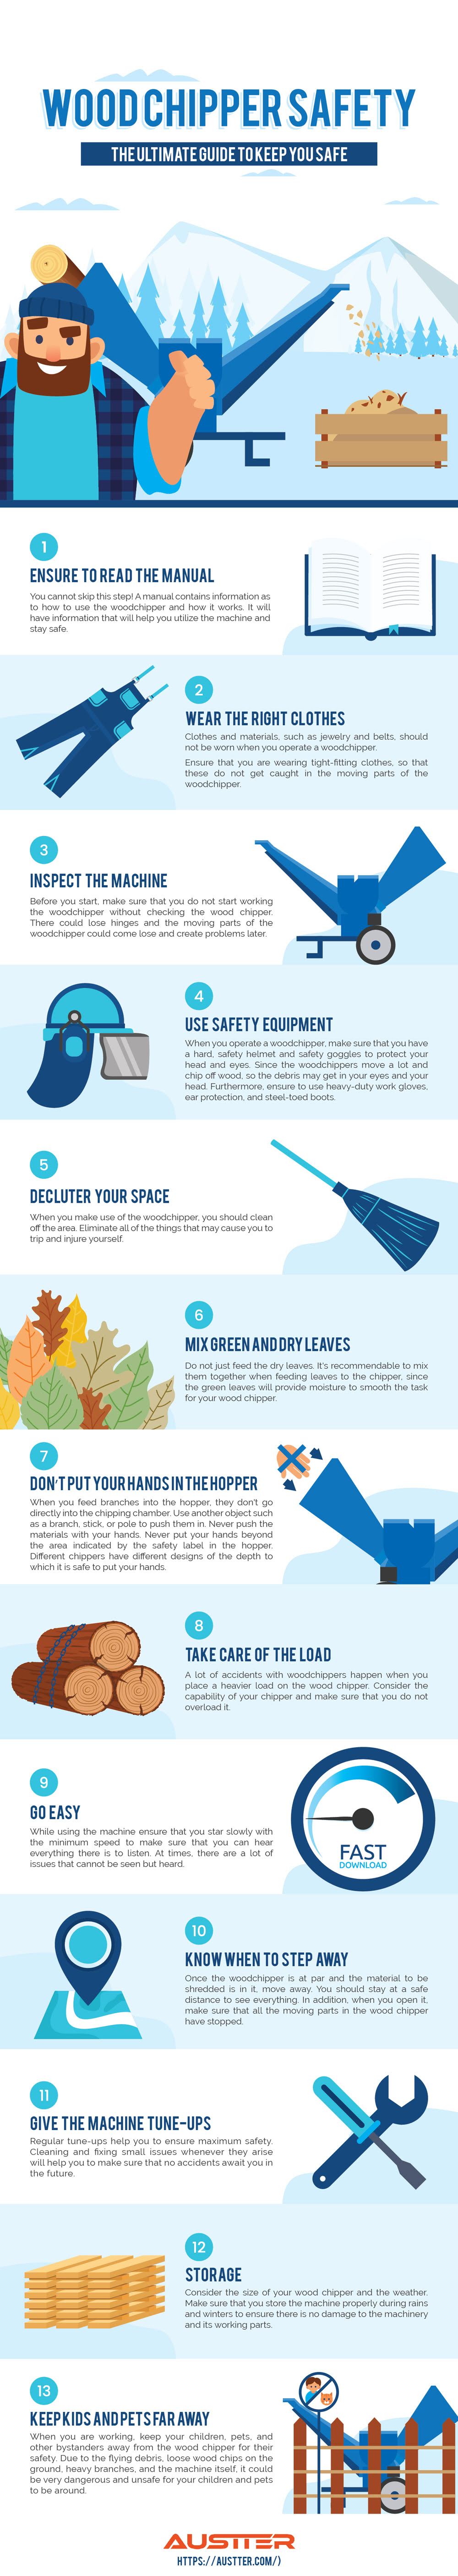 Wood Chipper Safety: The Ultimate Guide #infographic